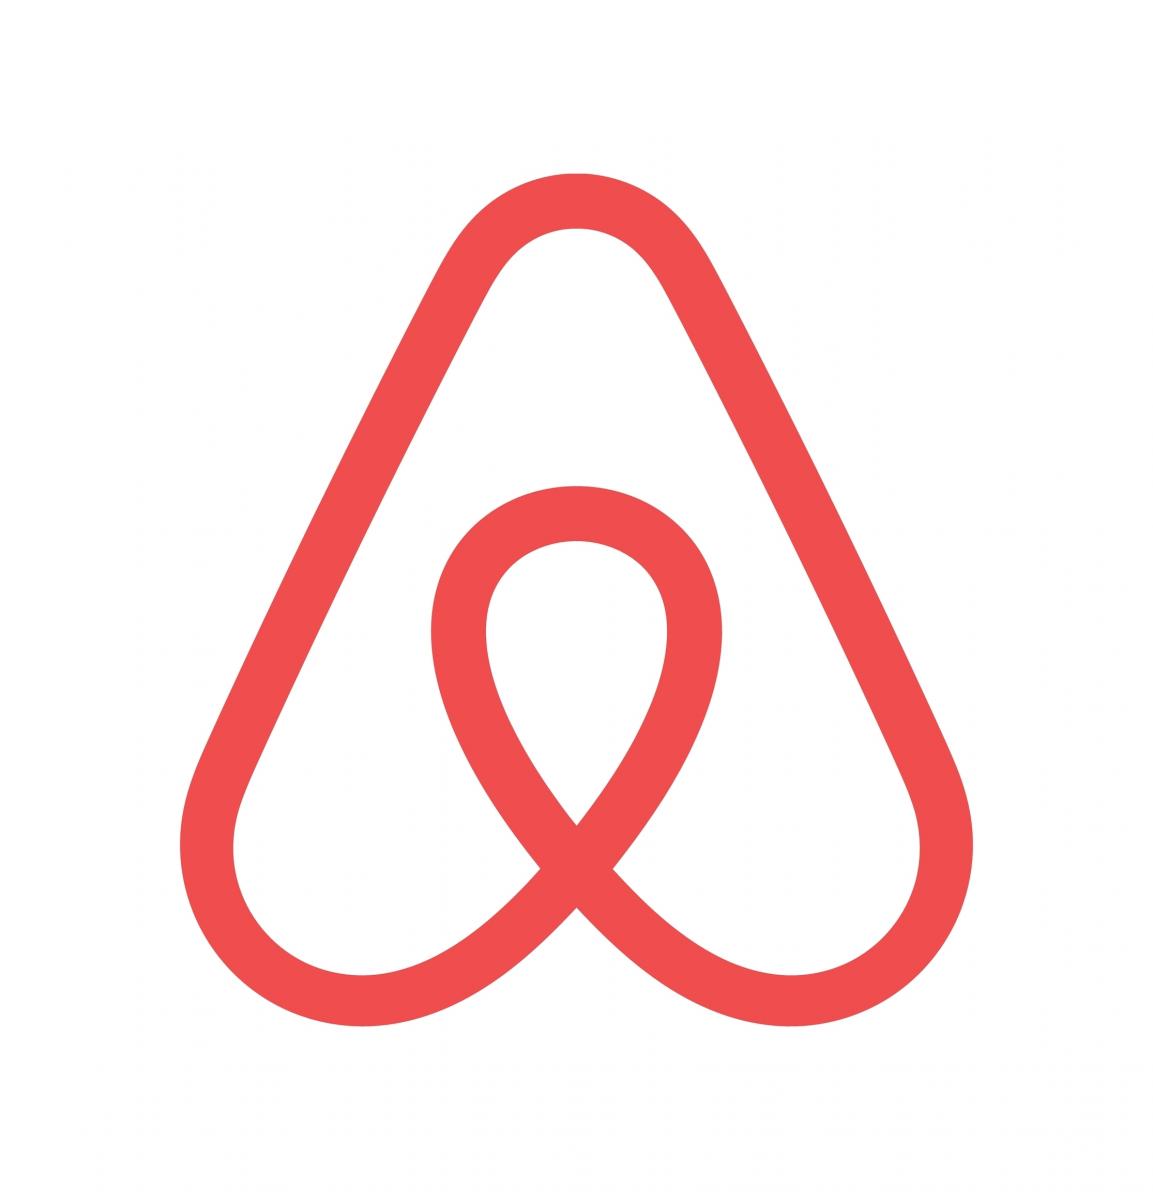 Council says Airbnb needs planning consent after years of short-letting 